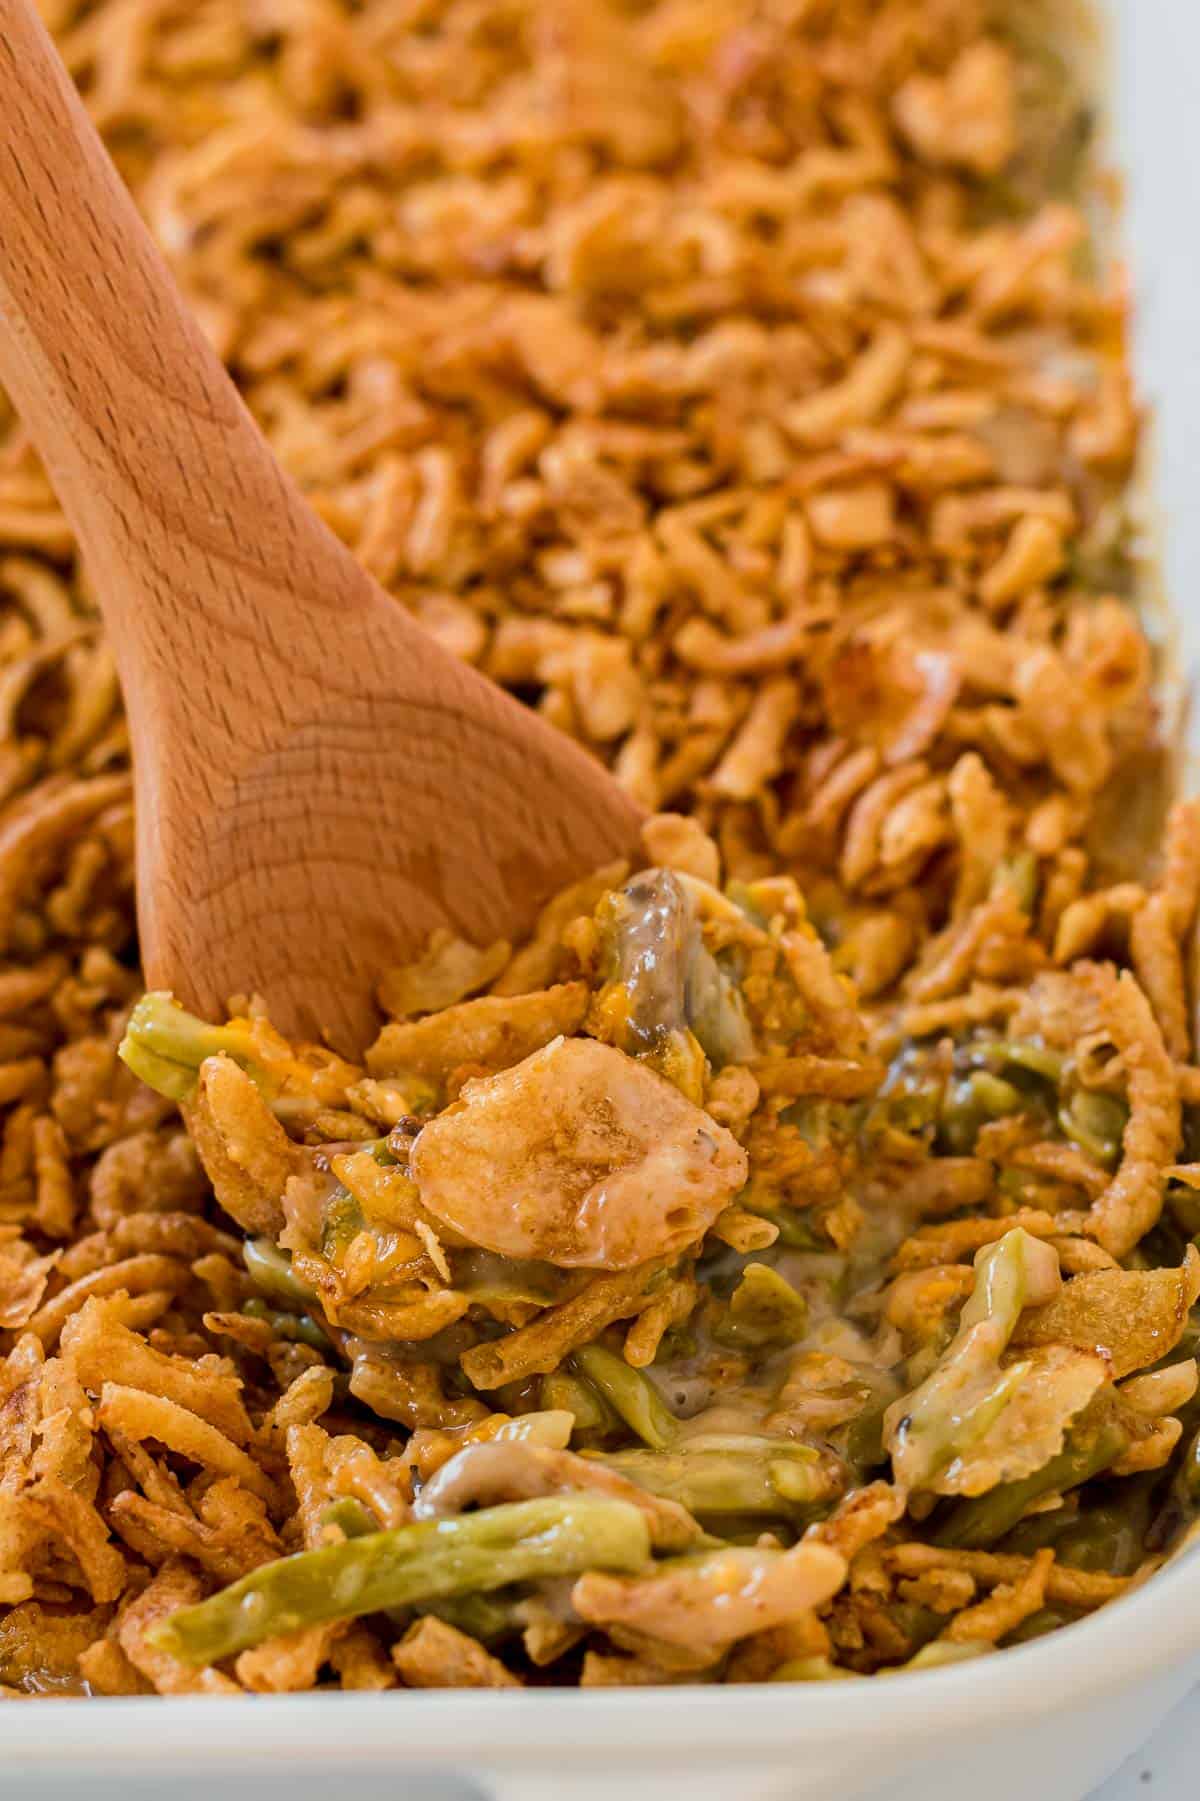 taking a scoop of green bean casserole from the dish